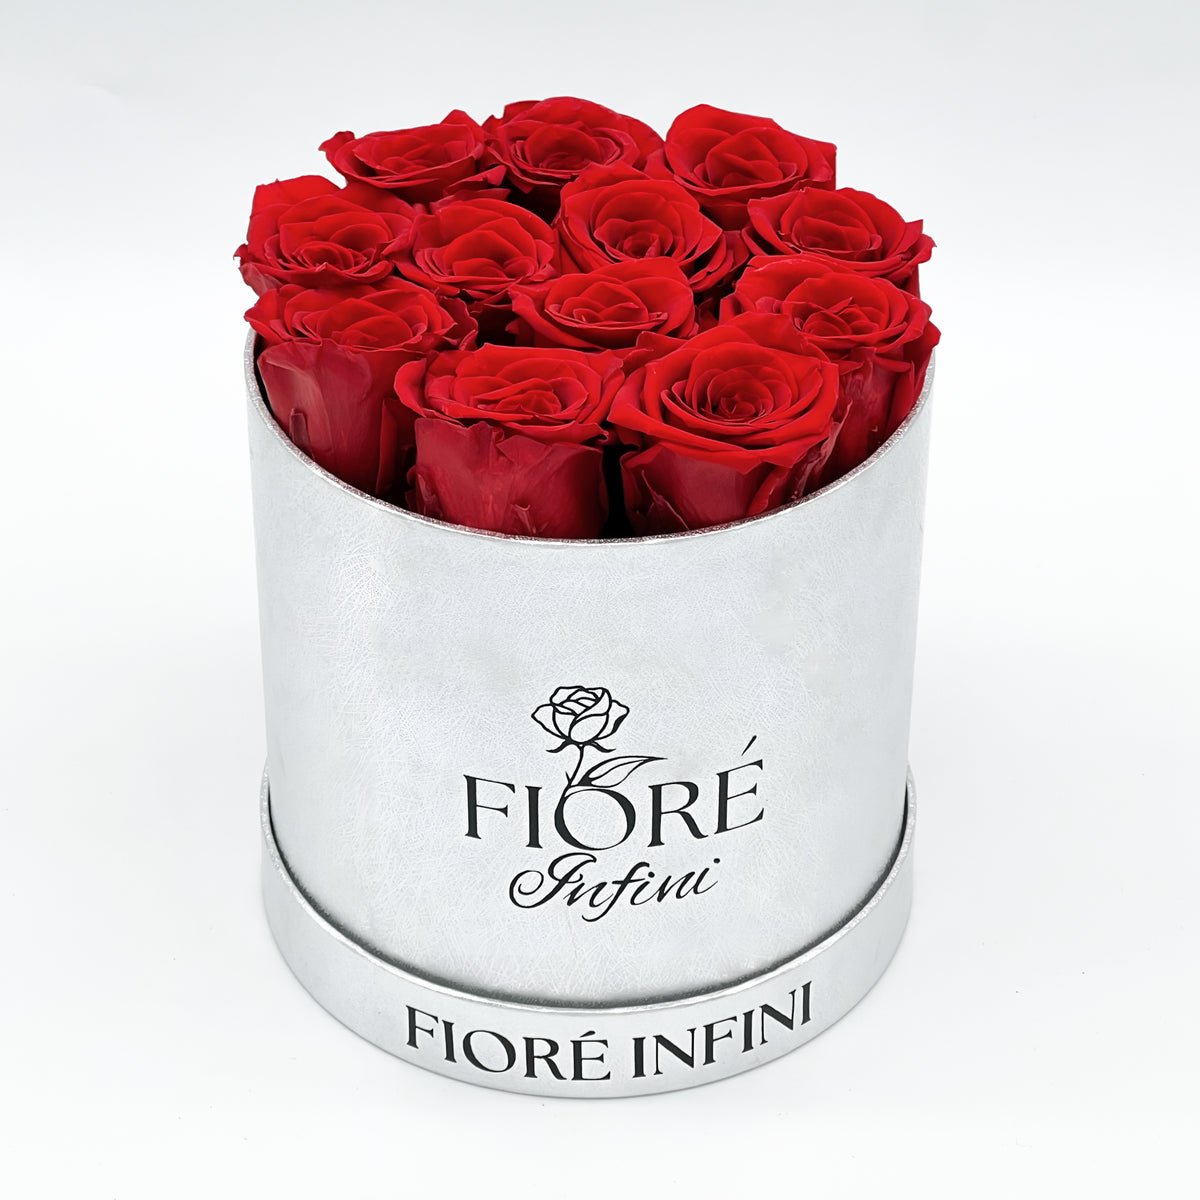 12 red forever roses in a round silver box